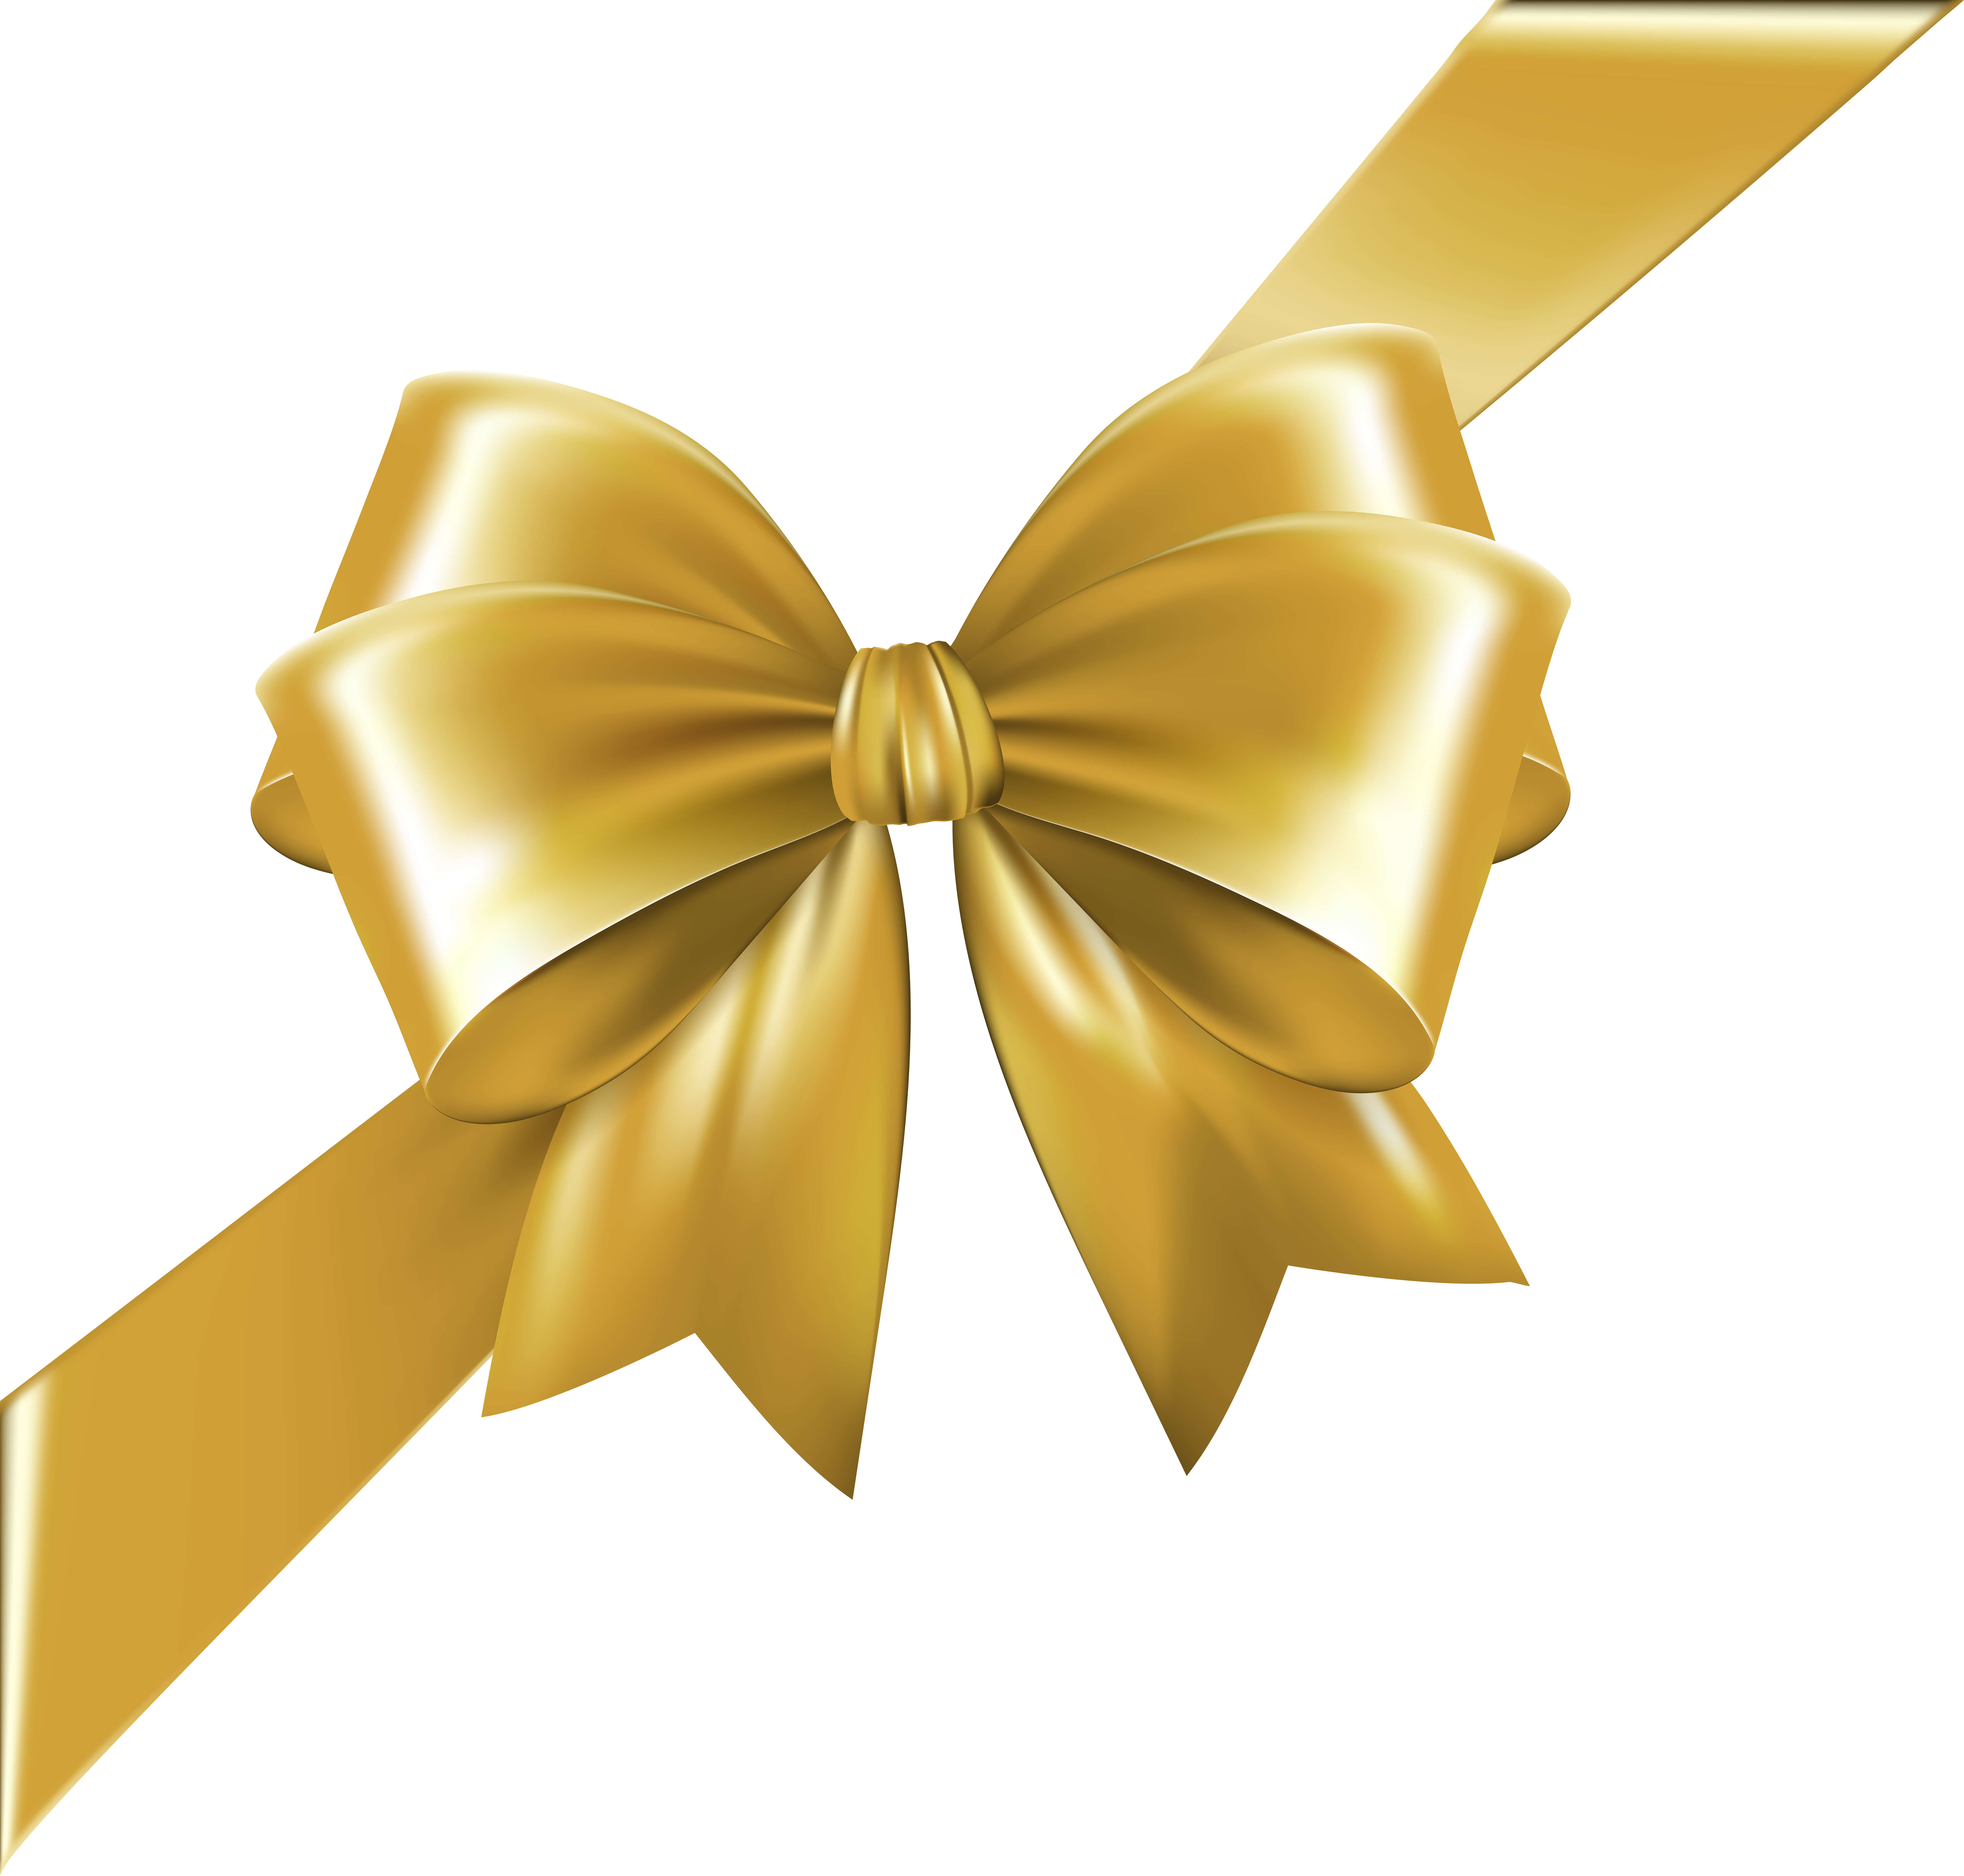 Free: Beige ribbon , Ribbon, Bow with Ribbon transparent background PNG  clipart 